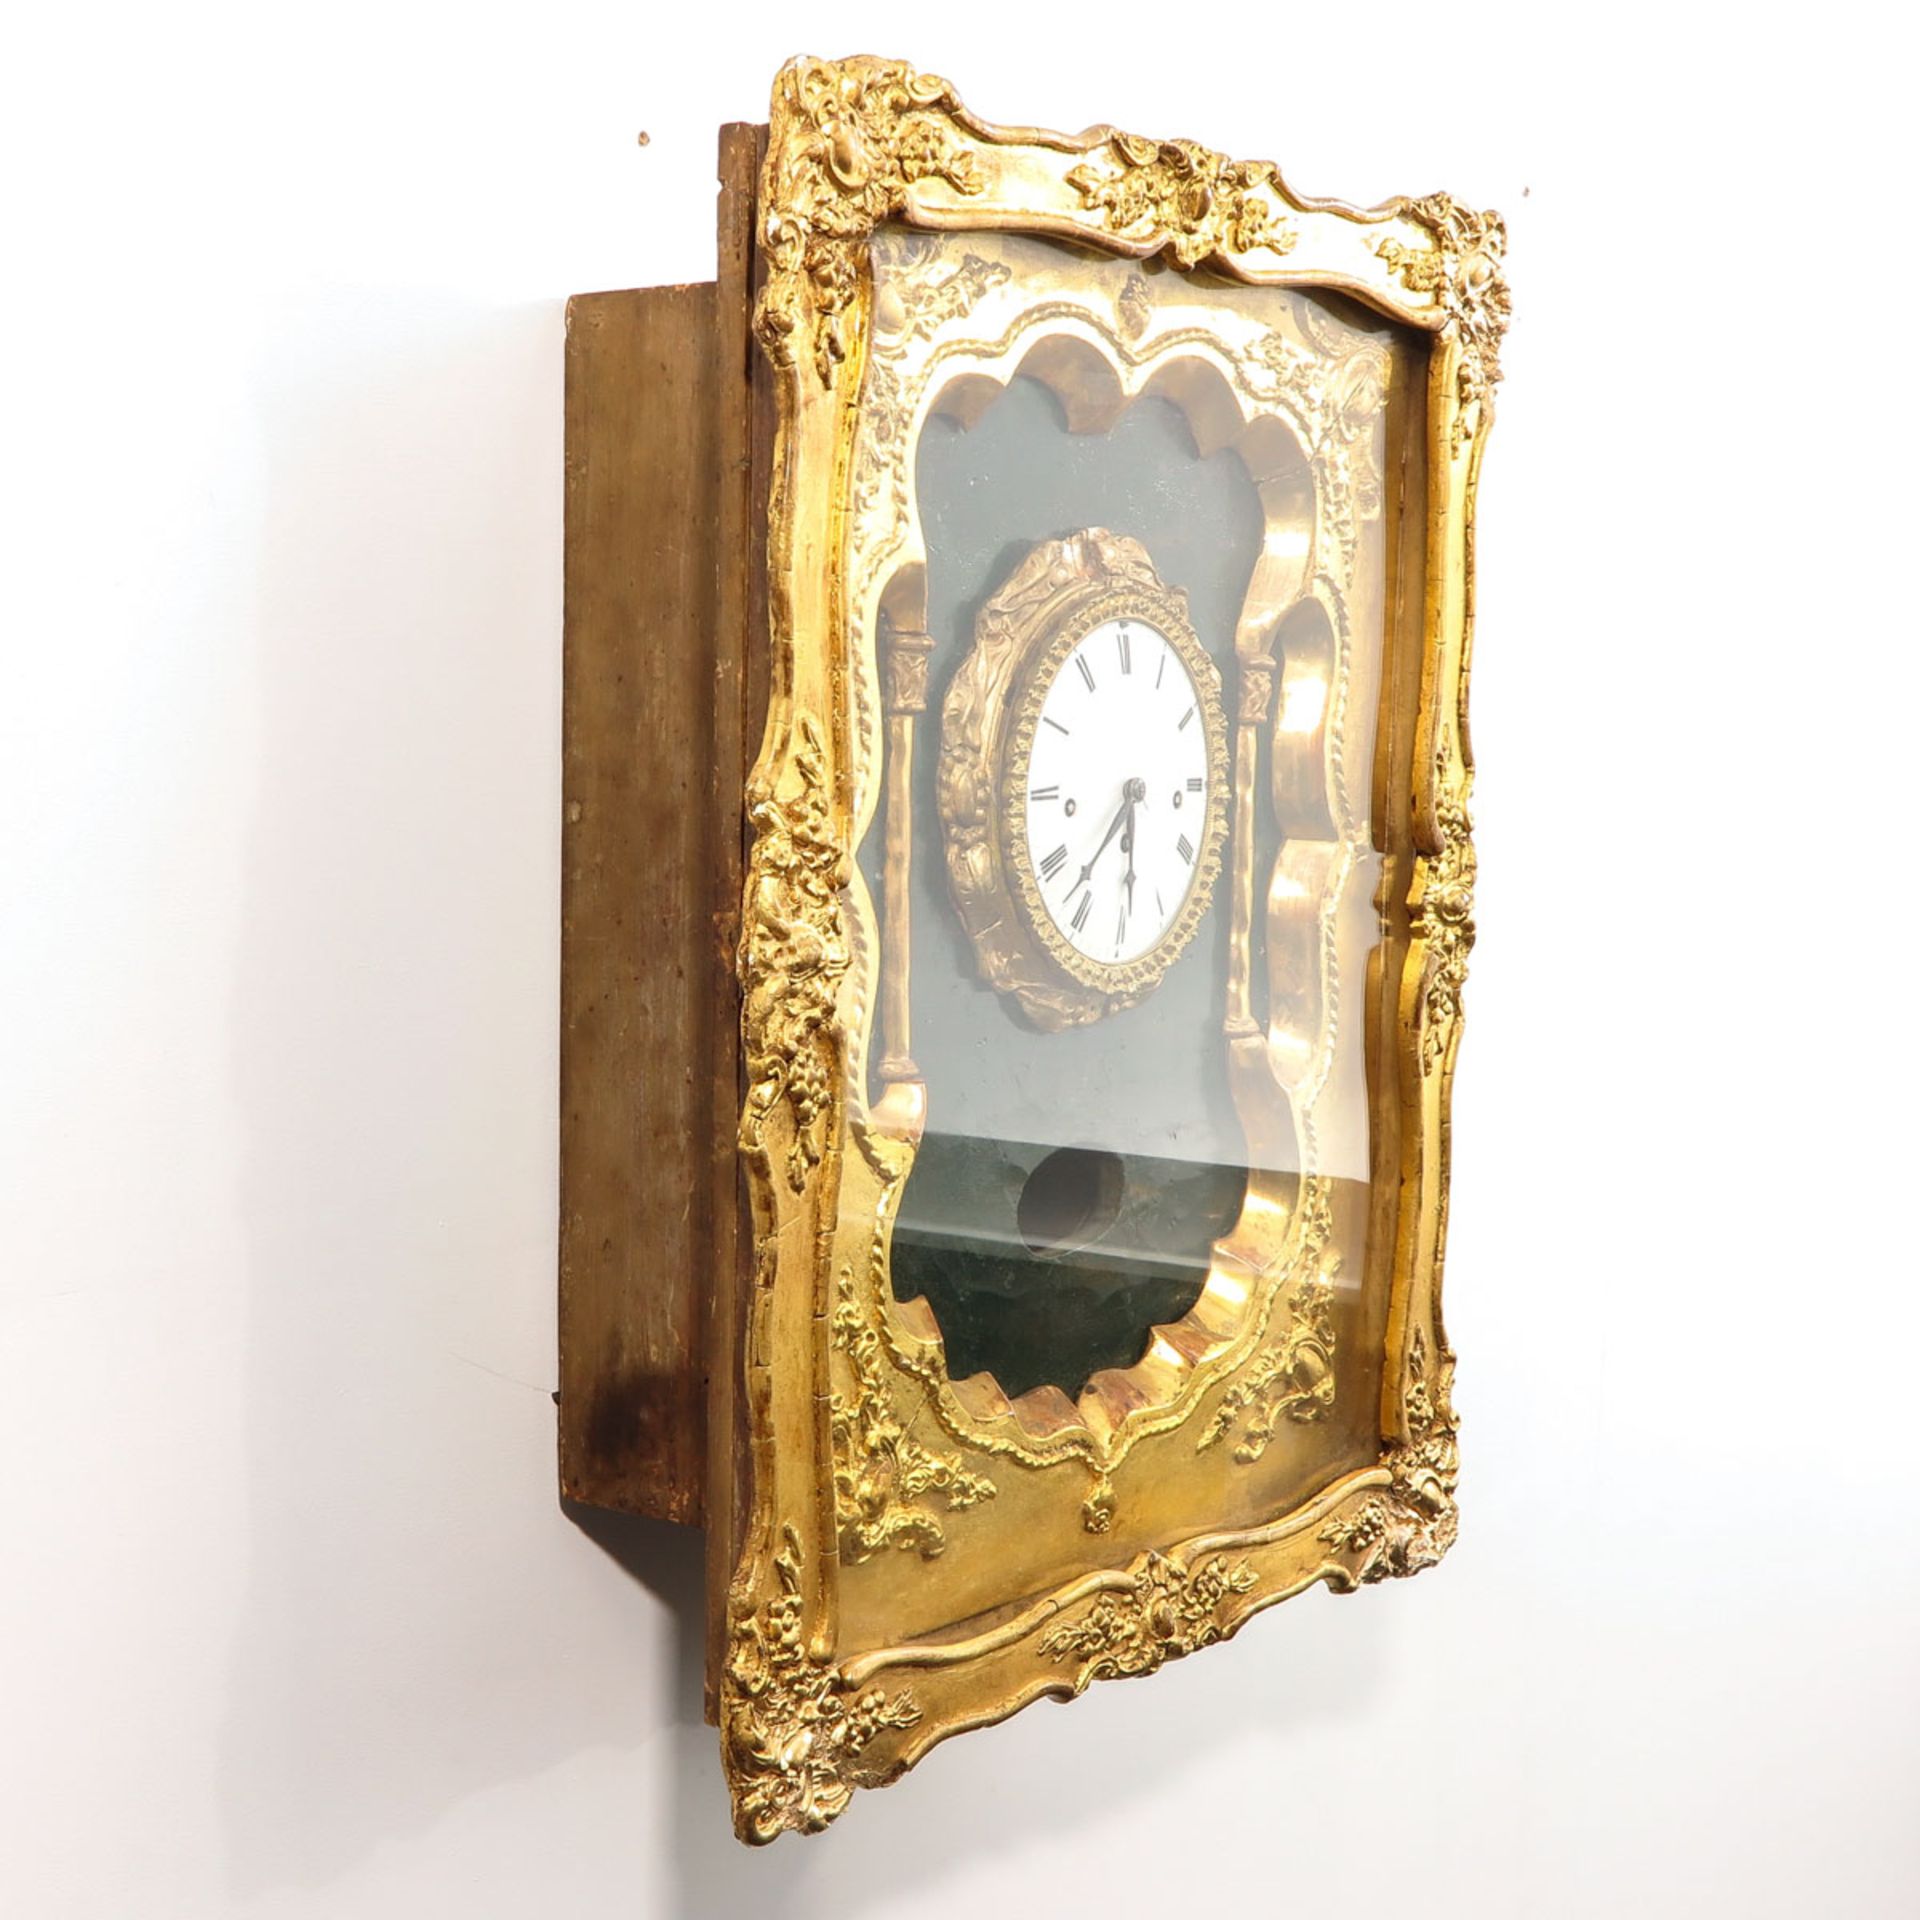 A 19th Century Viennese Musical Wall Clock - Image 3 of 10